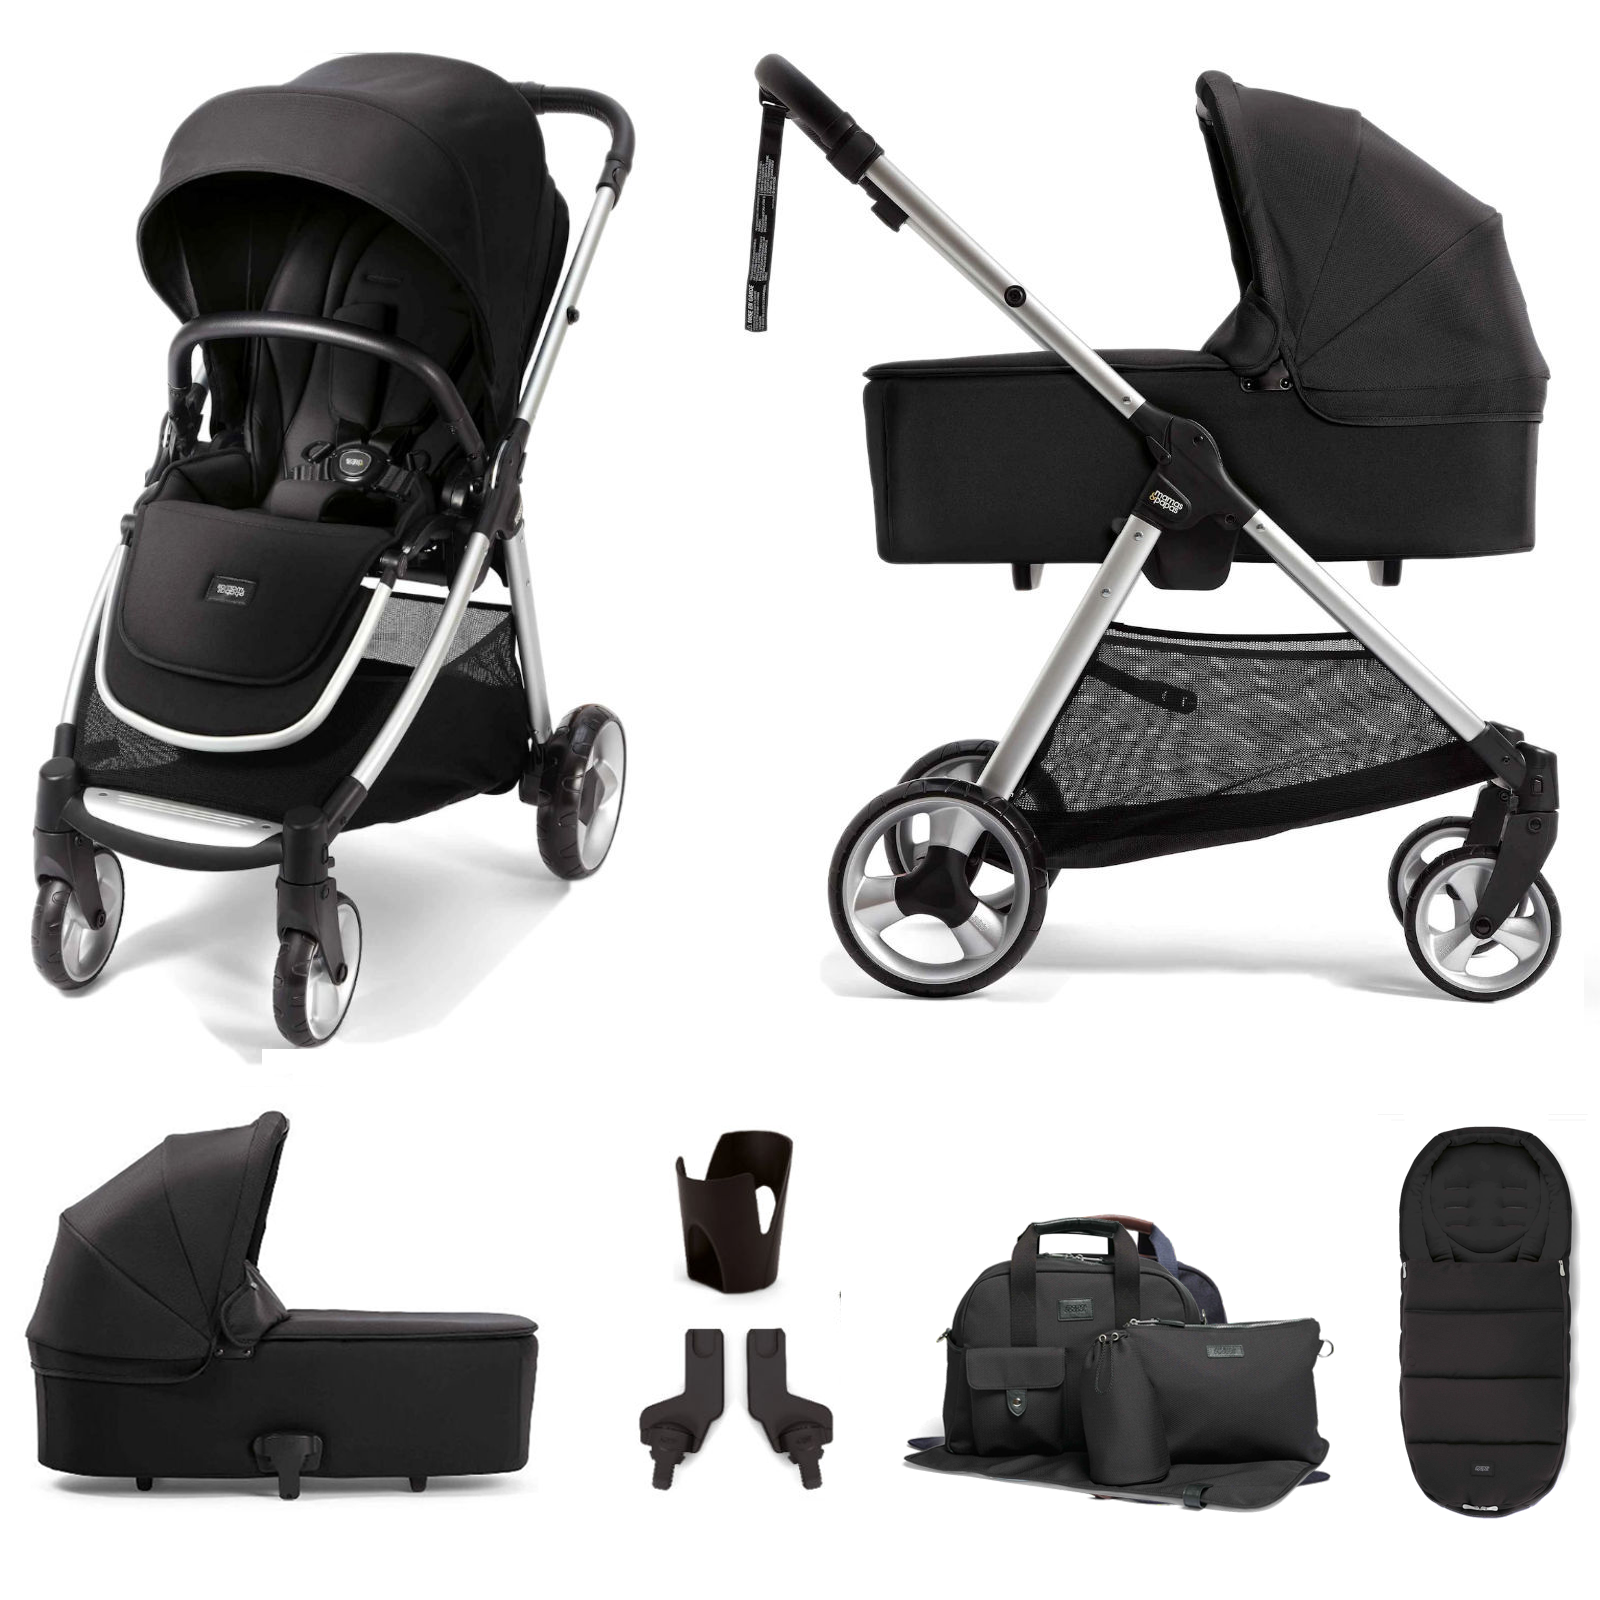 Mamas & Papas Flip XT2 (6pc) 2in1 Pushchair Stroller with Carrycot - Black